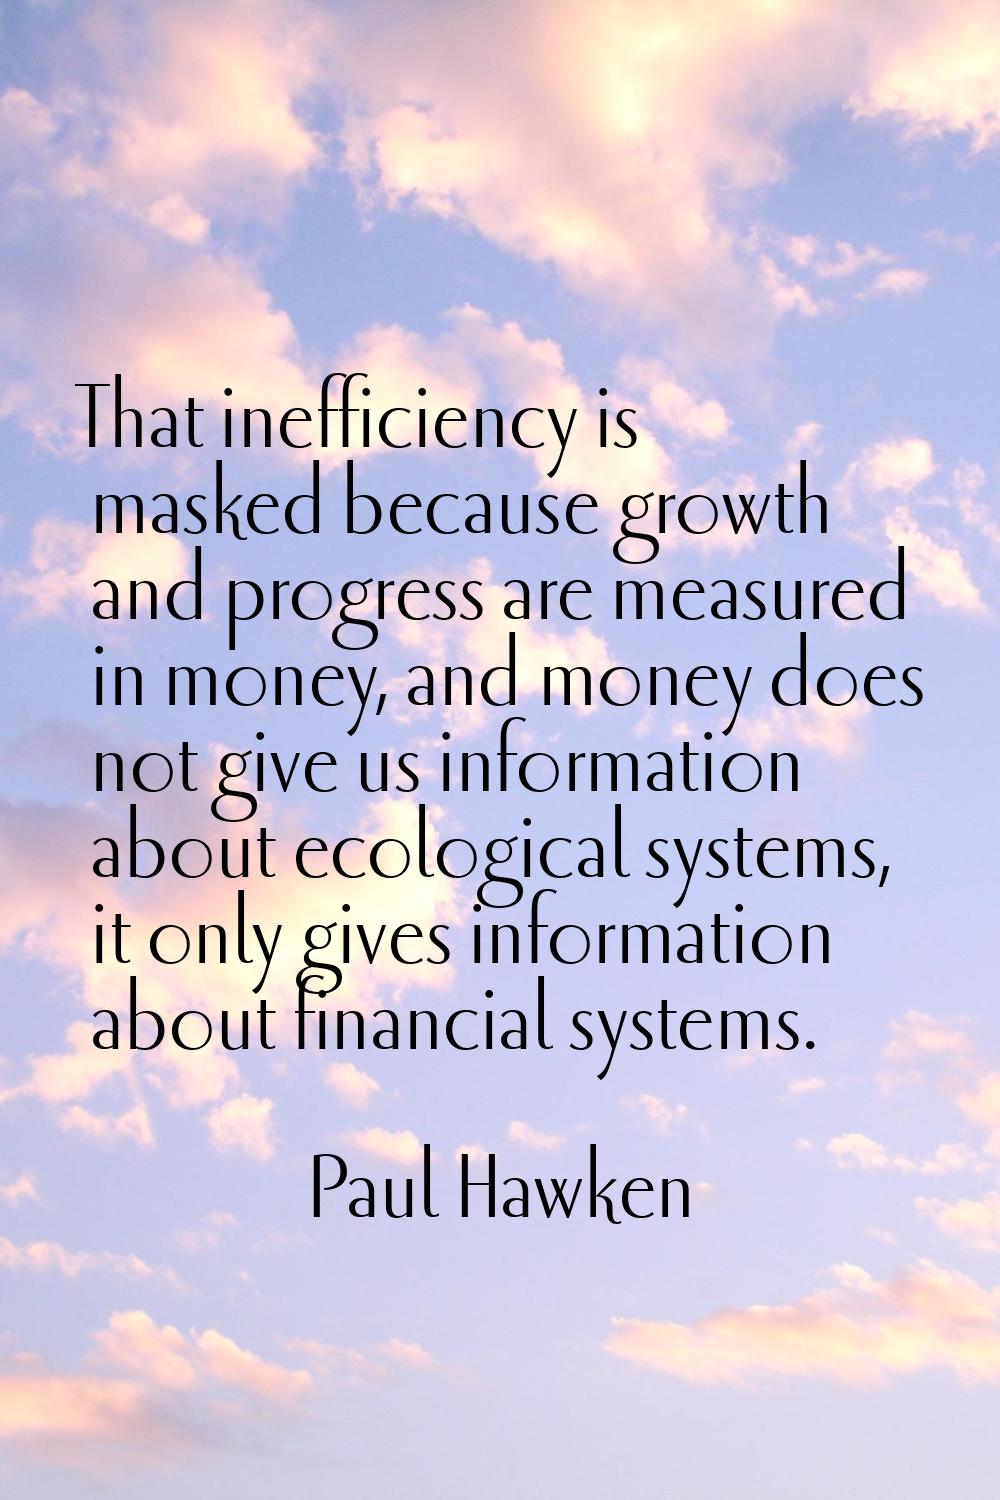 That inefficiency is masked because growth and progress are measured in money, and money does not g